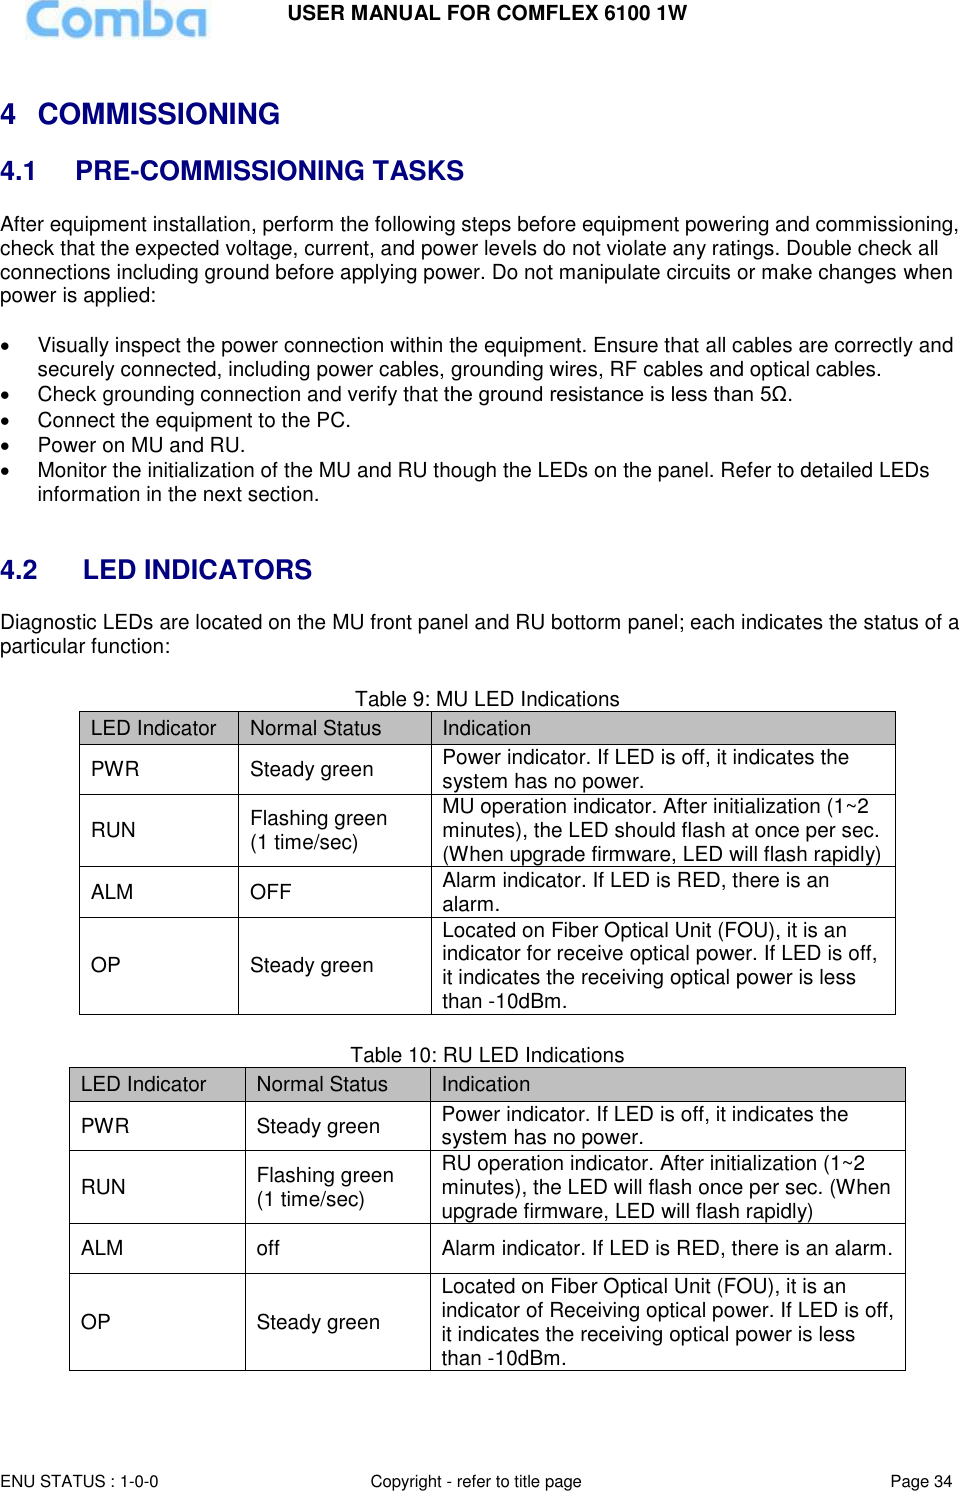 USER MANUAL FOR COMFLEX 6100 1W  ENU STATUS : 1-0-0 Copyright - refer to title page Page 34      4  COMMISSIONING 4.1 PRE-COMMISSIONING TASKS After equipment installation, perform the following steps before equipment powering and commissioning, check that the expected voltage, current, and power levels do not violate any ratings. Double check all connections including ground before applying power. Do not manipulate circuits or make changes when power is applied:    Visually inspect the power connection within the equipment. Ensure that all cables are correctly and securely connected, including power cables, grounding wires, RF cables and optical cables.    Check grounding connection and verify that the ground resistance is less than 5Ω.   Connect the equipment to the PC.    Power on MU and RU.   Monitor the initialization of the MU and RU though the LEDs on the panel. Refer to detailed LEDs information in the next section.   4.2   LED INDICATORS Diagnostic LEDs are located on the MU front panel and RU bottorm panel; each indicates the status of a particular function:  Table 9: MU LED Indications LED Indicator Normal Status Indication PWR Steady green Power indicator. If LED is off, it indicates the system has no power.  RUN Flashing green (1 time/sec) MU operation indicator. After initialization (1~2 minutes), the LED should flash at once per sec. (When upgrade firmware, LED will flash rapidly)  ALM OFF Alarm indicator. If LED is RED, there is an alarm. OP Steady green Located on Fiber Optical Unit (FOU), it is an indicator for receive optical power. If LED is off, it indicates the receiving optical power is less than -10dBm.  Table 10: RU LED Indications LED Indicator Normal Status Indication PWR Steady green Power indicator. If LED is off, it indicates the system has no power. RUN Flashing green (1 time/sec) RU operation indicator. After initialization (1~2 minutes), the LED will flash once per sec. (When upgrade firmware, LED will flash rapidly) ALM off Alarm indicator. If LED is RED, there is an alarm. OP Steady green Located on Fiber Optical Unit (FOU), it is an indicator of Receiving optical power. If LED is off, it indicates the receiving optical power is less than -10dBm.  